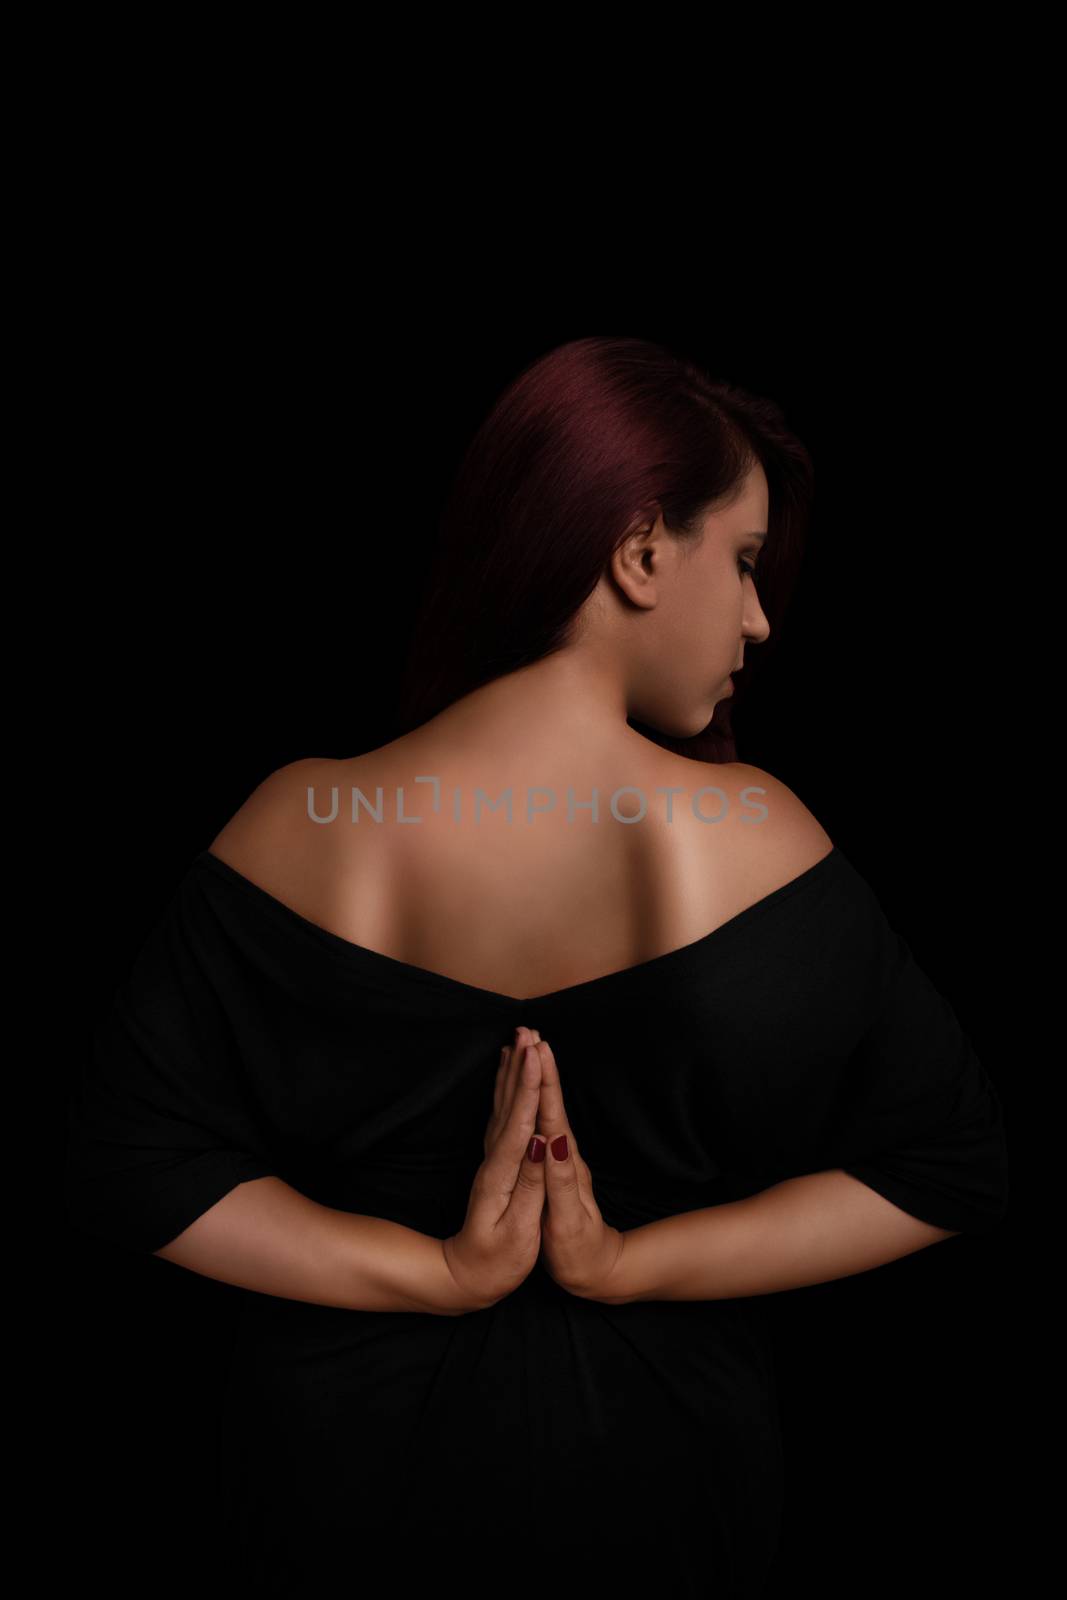 Low key portrait of a young girl in black dress with her hands behind her back, practicing yoga isolated on black background.